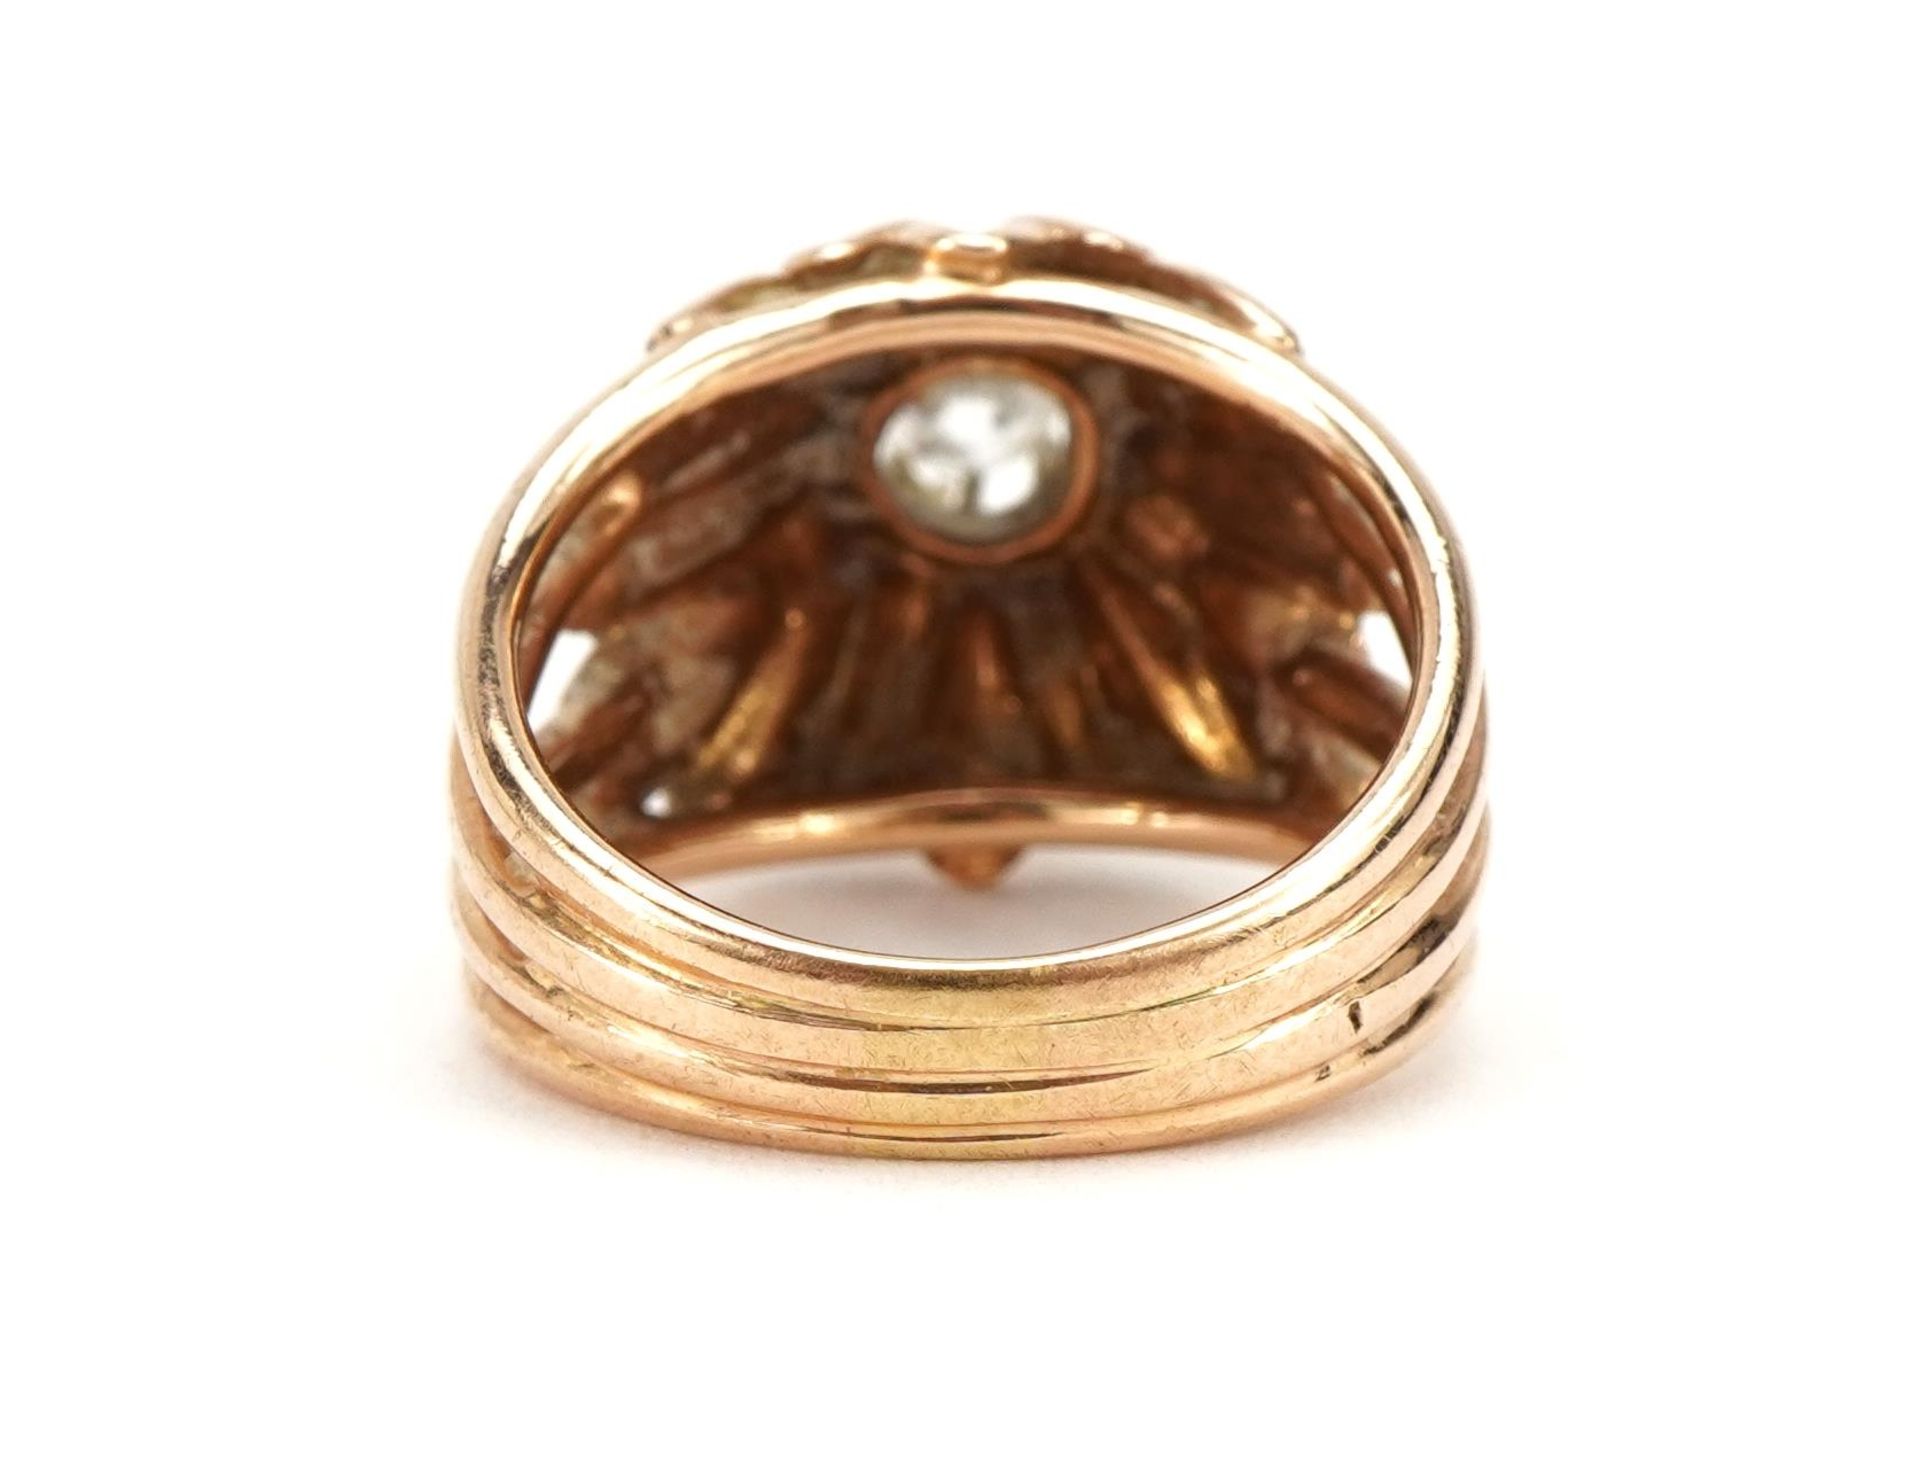 18ct rose gold flower head ring set with a clear stone, size M, 8.4g - Image 2 of 2